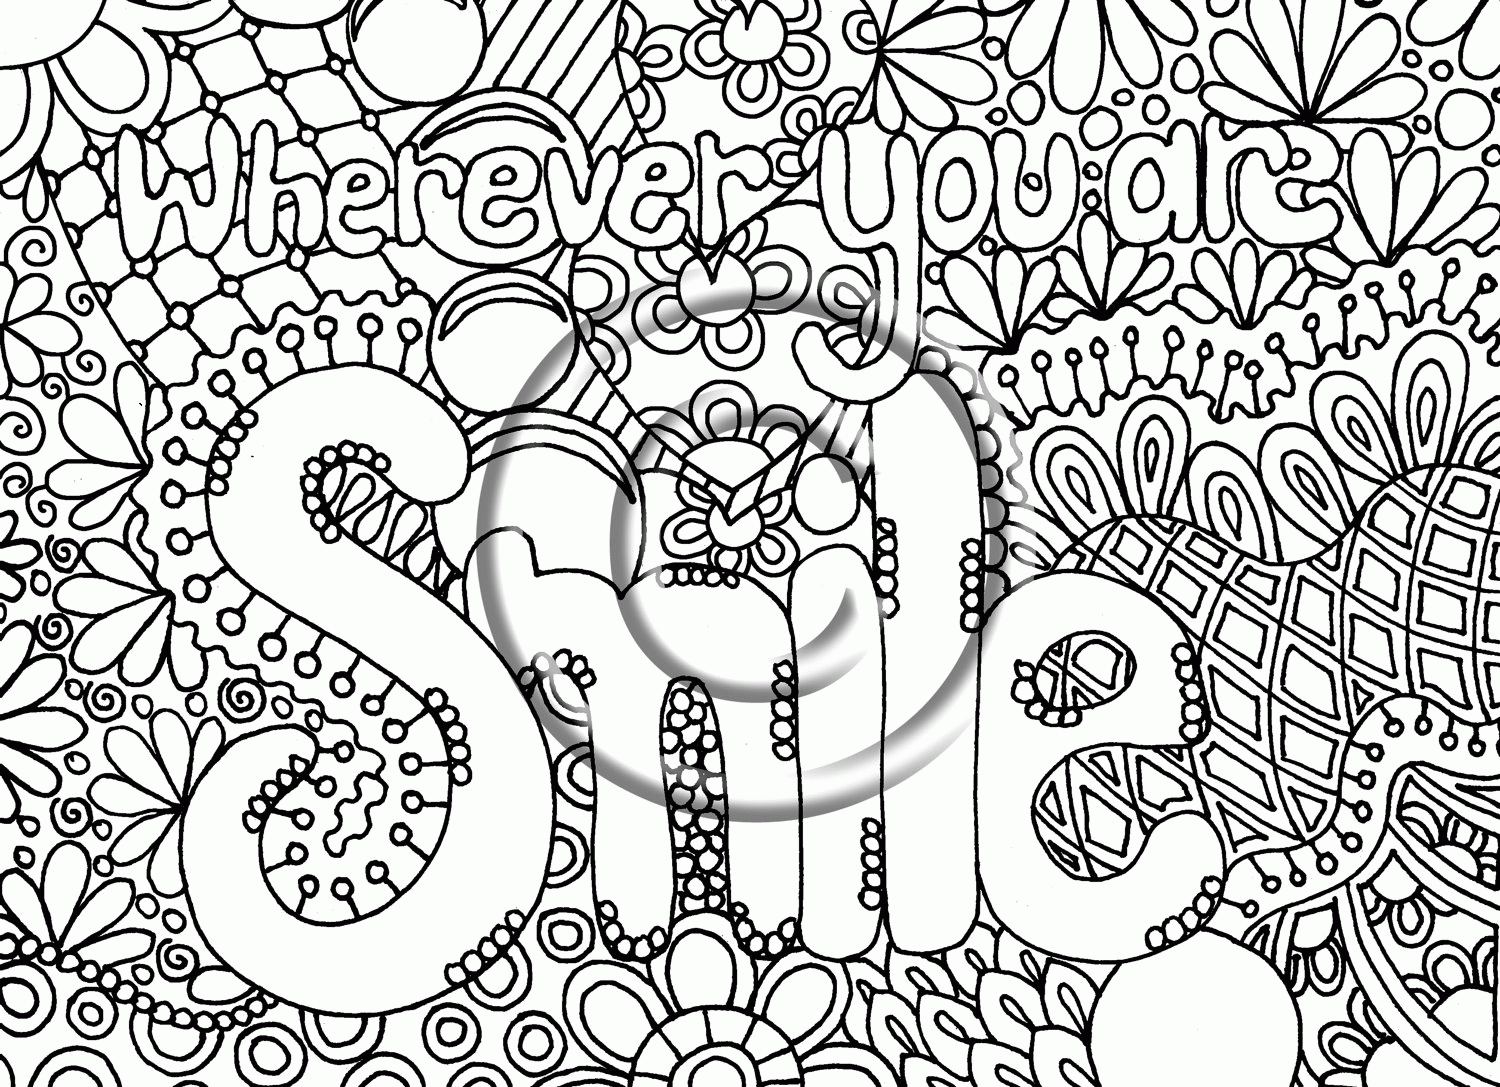 Coloring Pages Adults Difficult Abstract Pattern - Colorine.net ...